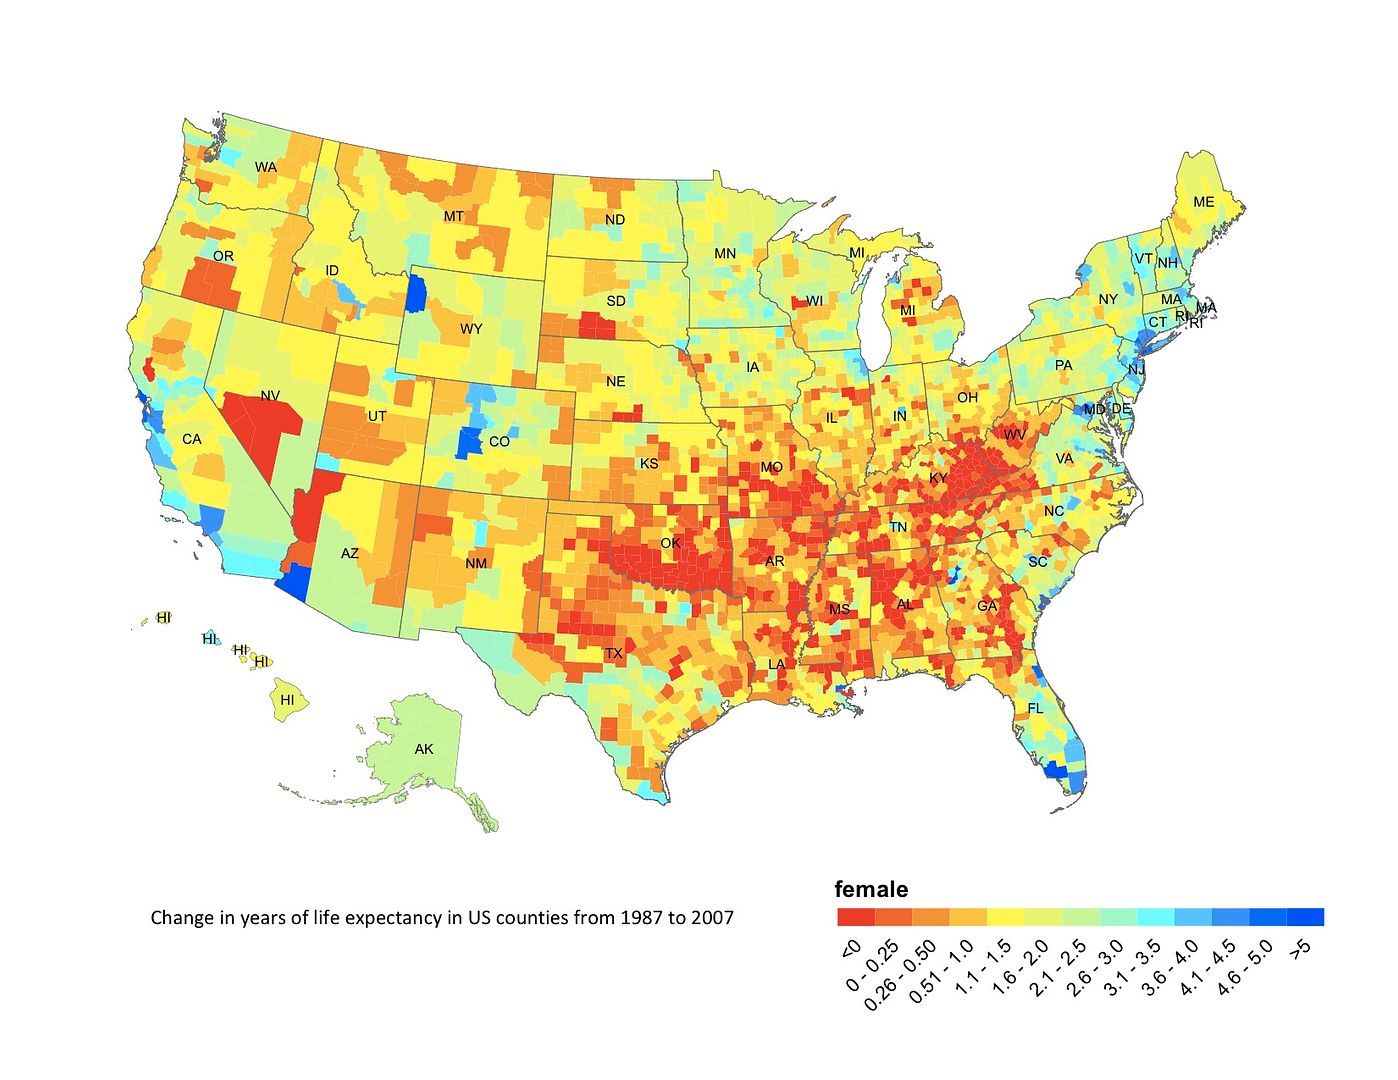 map showing the change in life expectancy for women in US counties from 1987 to 2007 